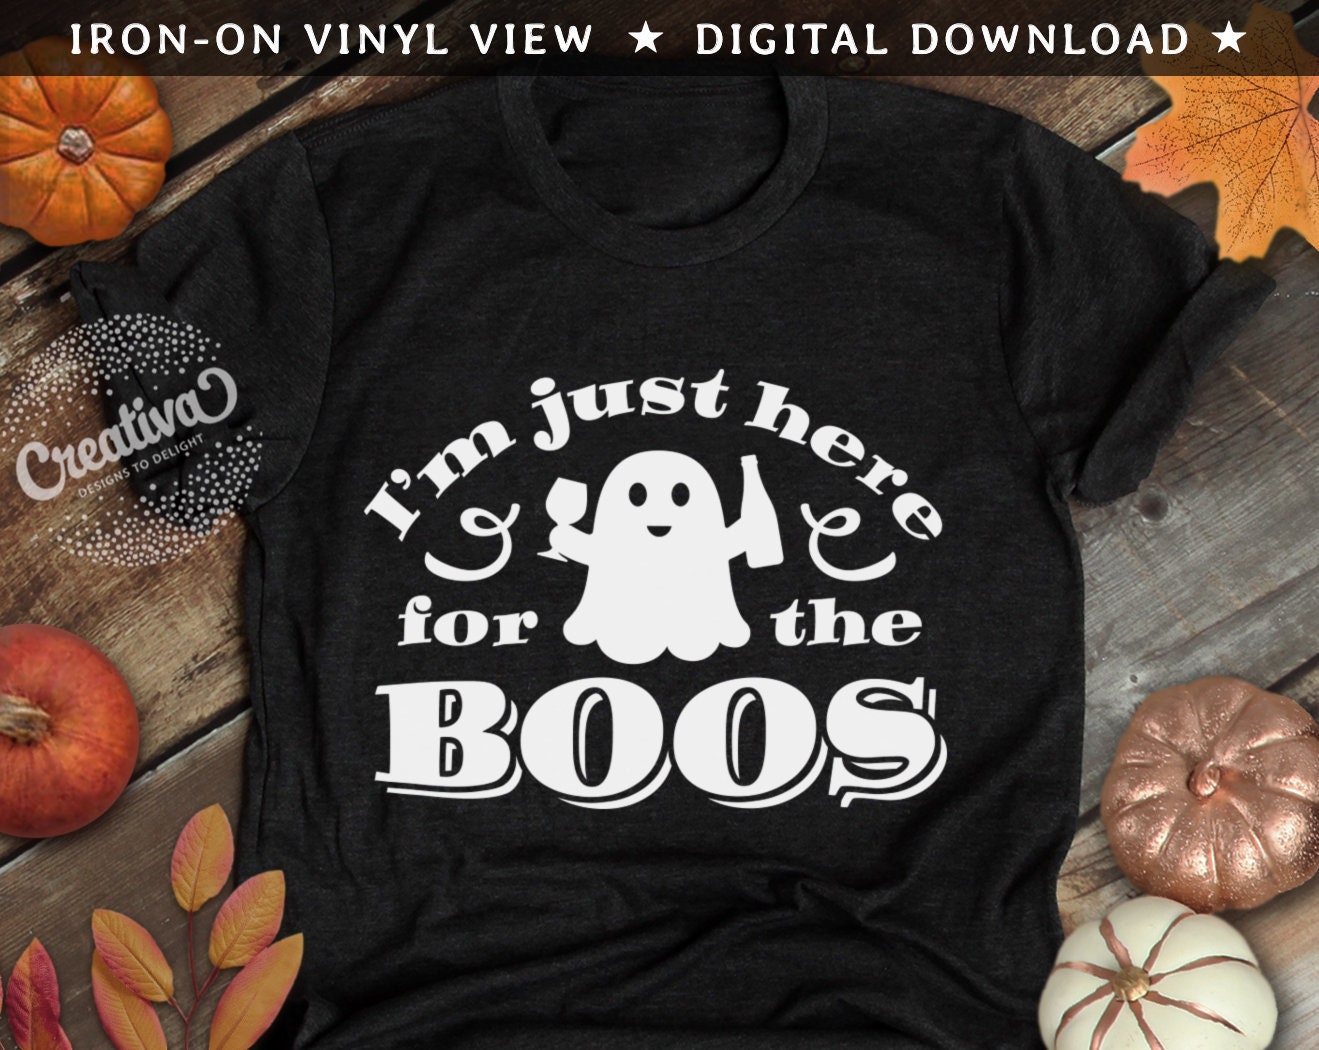 drinking svg alcohol svg wine svg halloween shirt here for the boos adult halloween iron on i/'m only here for the boos svg funny svg